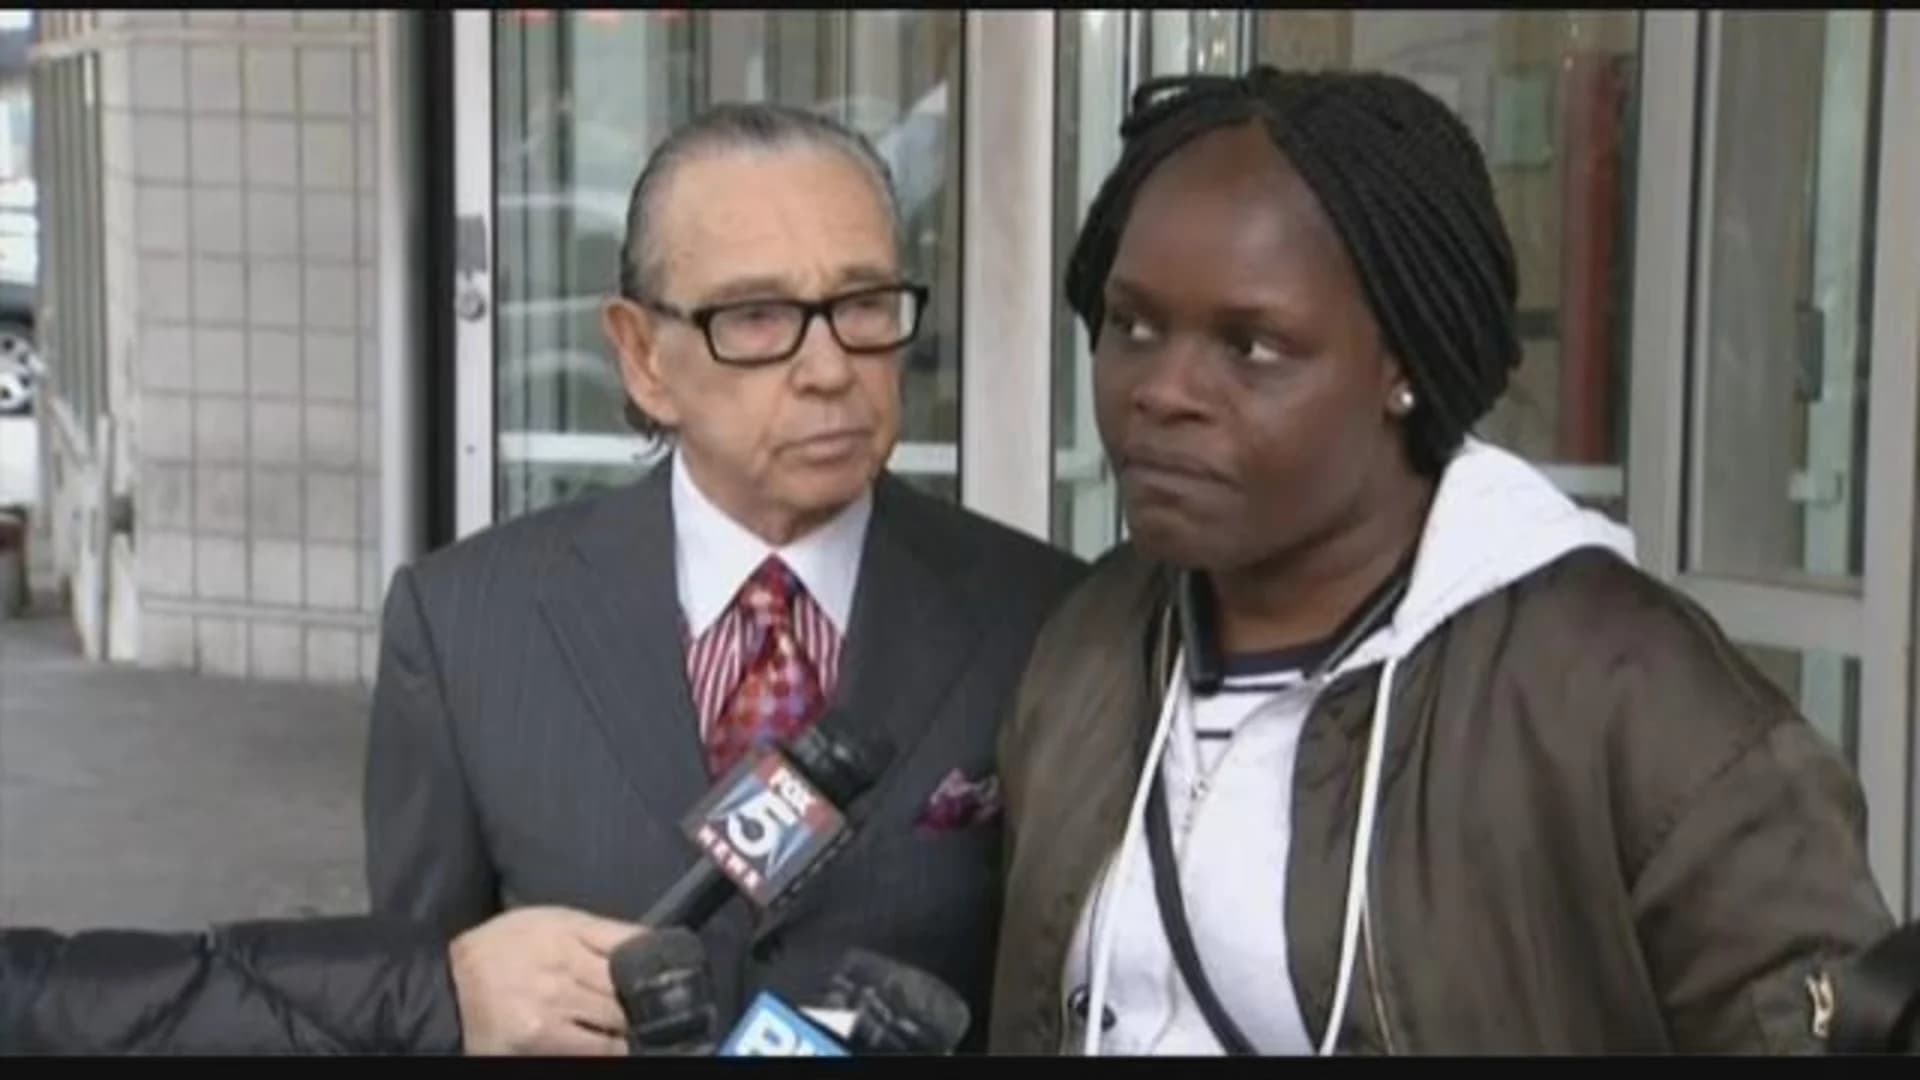 Mom of Bronx teen fatally stabbed in school claims city was negligent